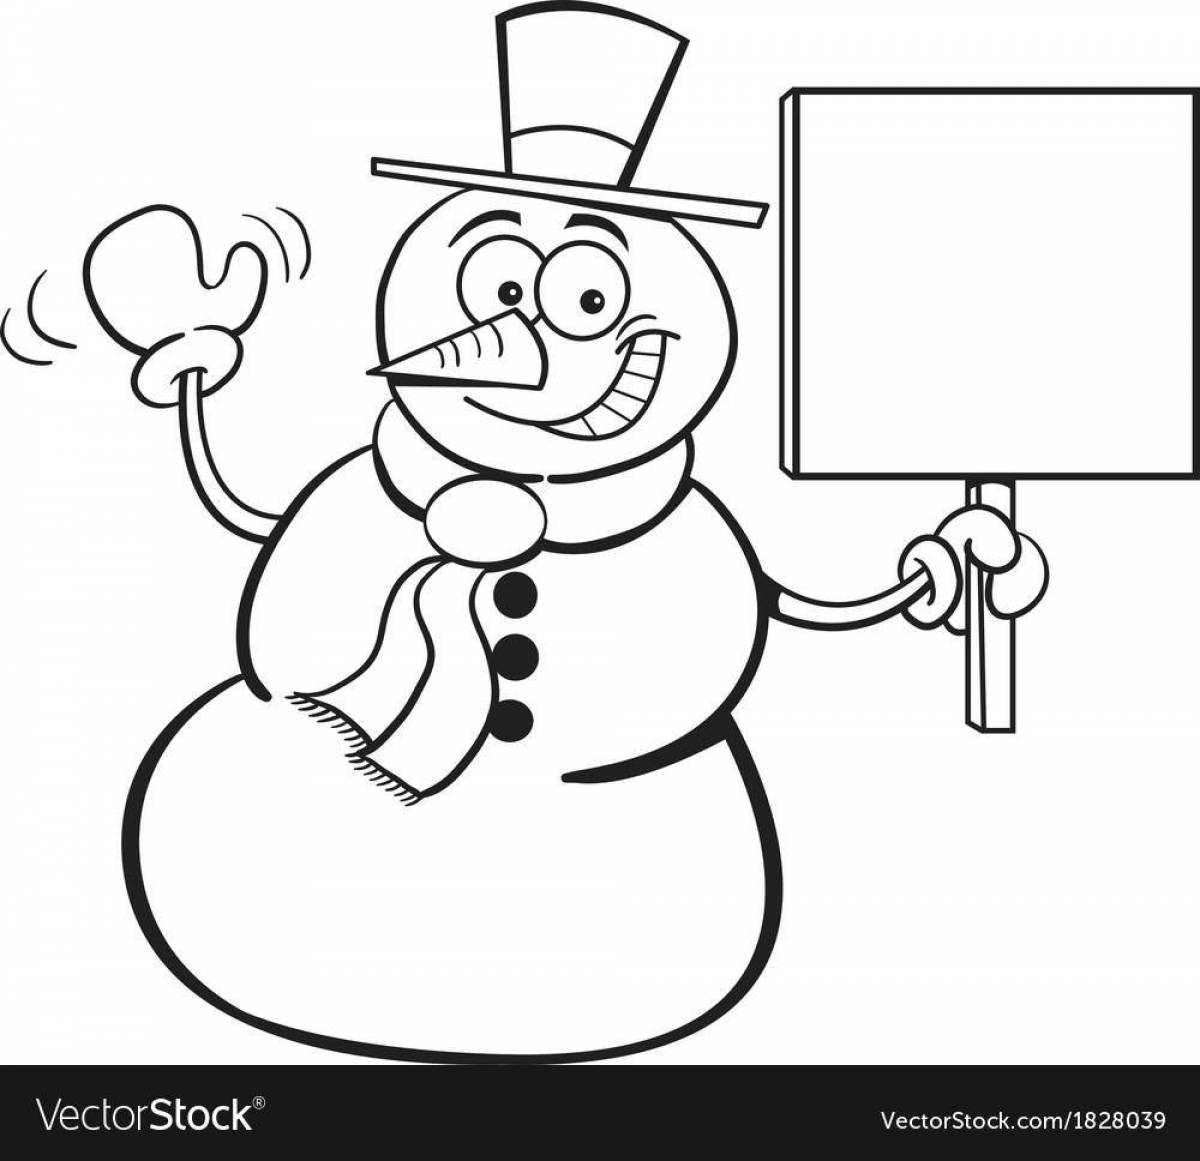 Smiling snowman coloring without a nose